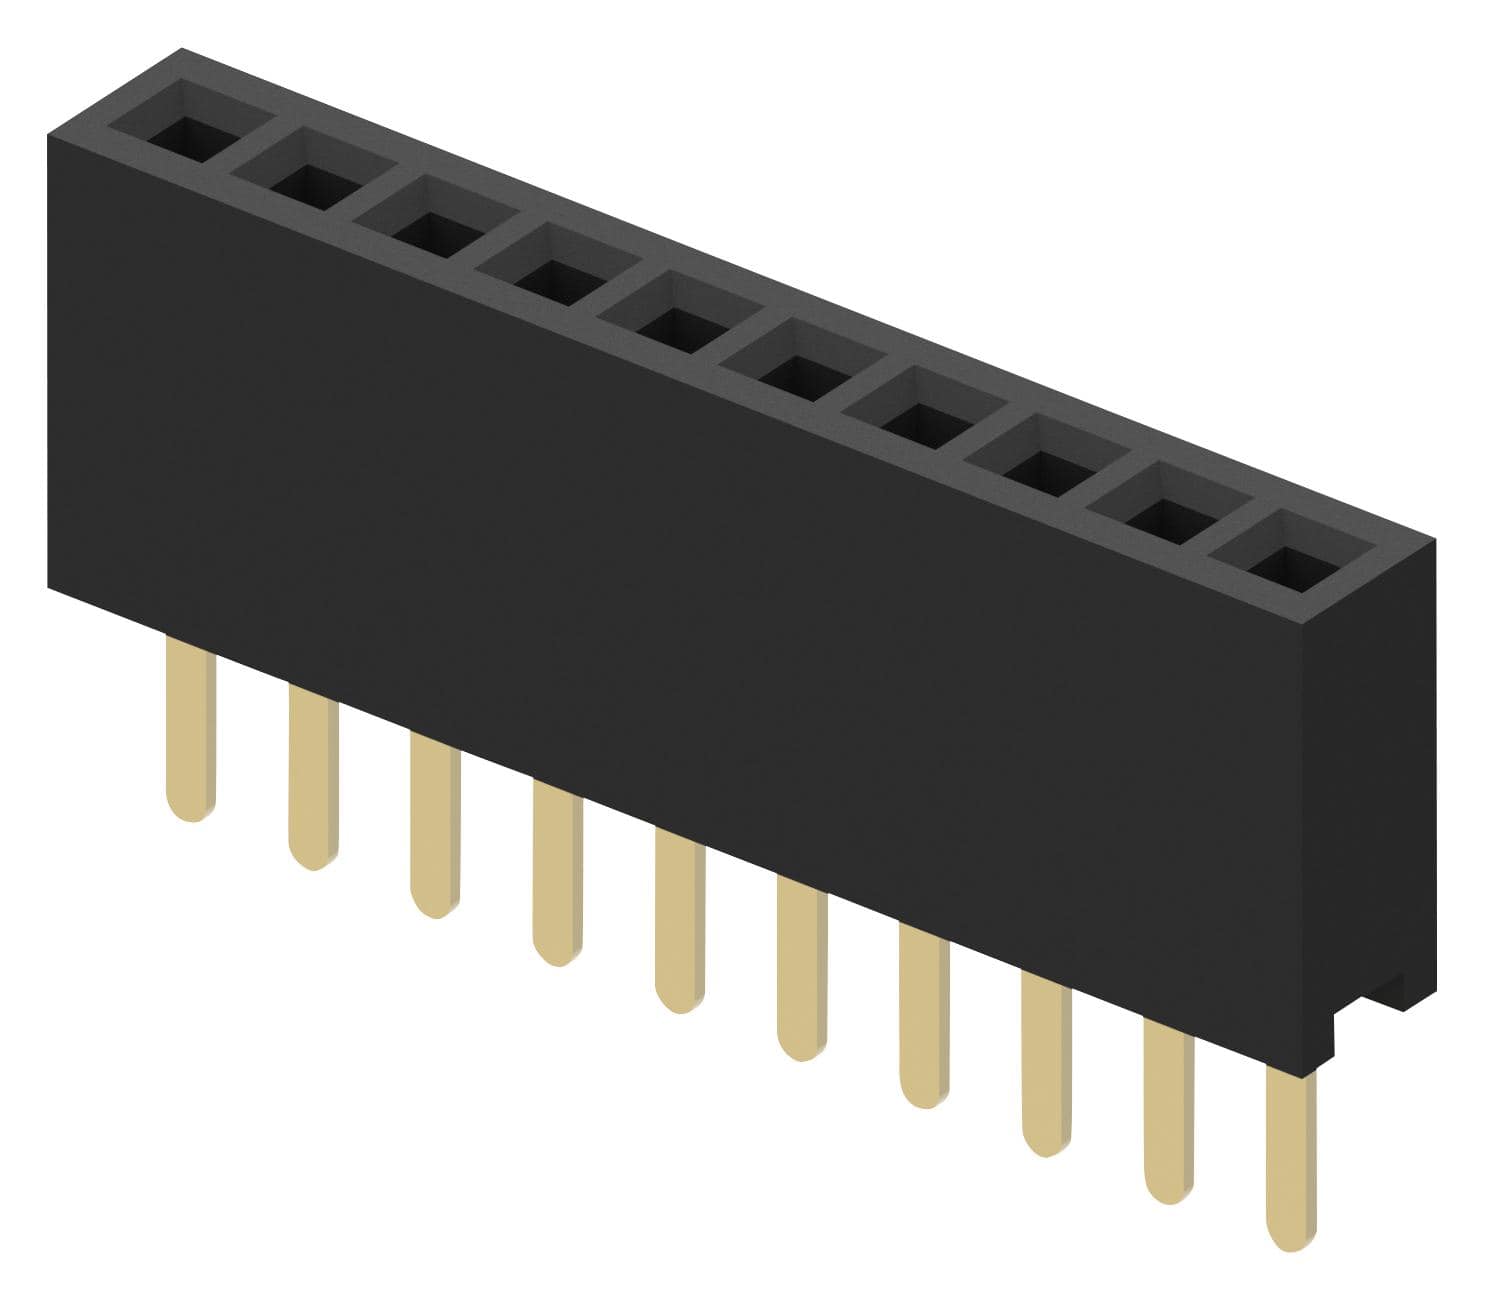 GCT (GLOBAL CONNECTOR TECHNOLOGY) Board-to-Board BD080-10-A-0230-L-D RECEPTACLE, BOARD TO BOARD, 1ROW, 10WAY GCT (GLOBAL CONNECTOR TECHNOLOGY) 2293770 BD080-10-A-0230-L-D